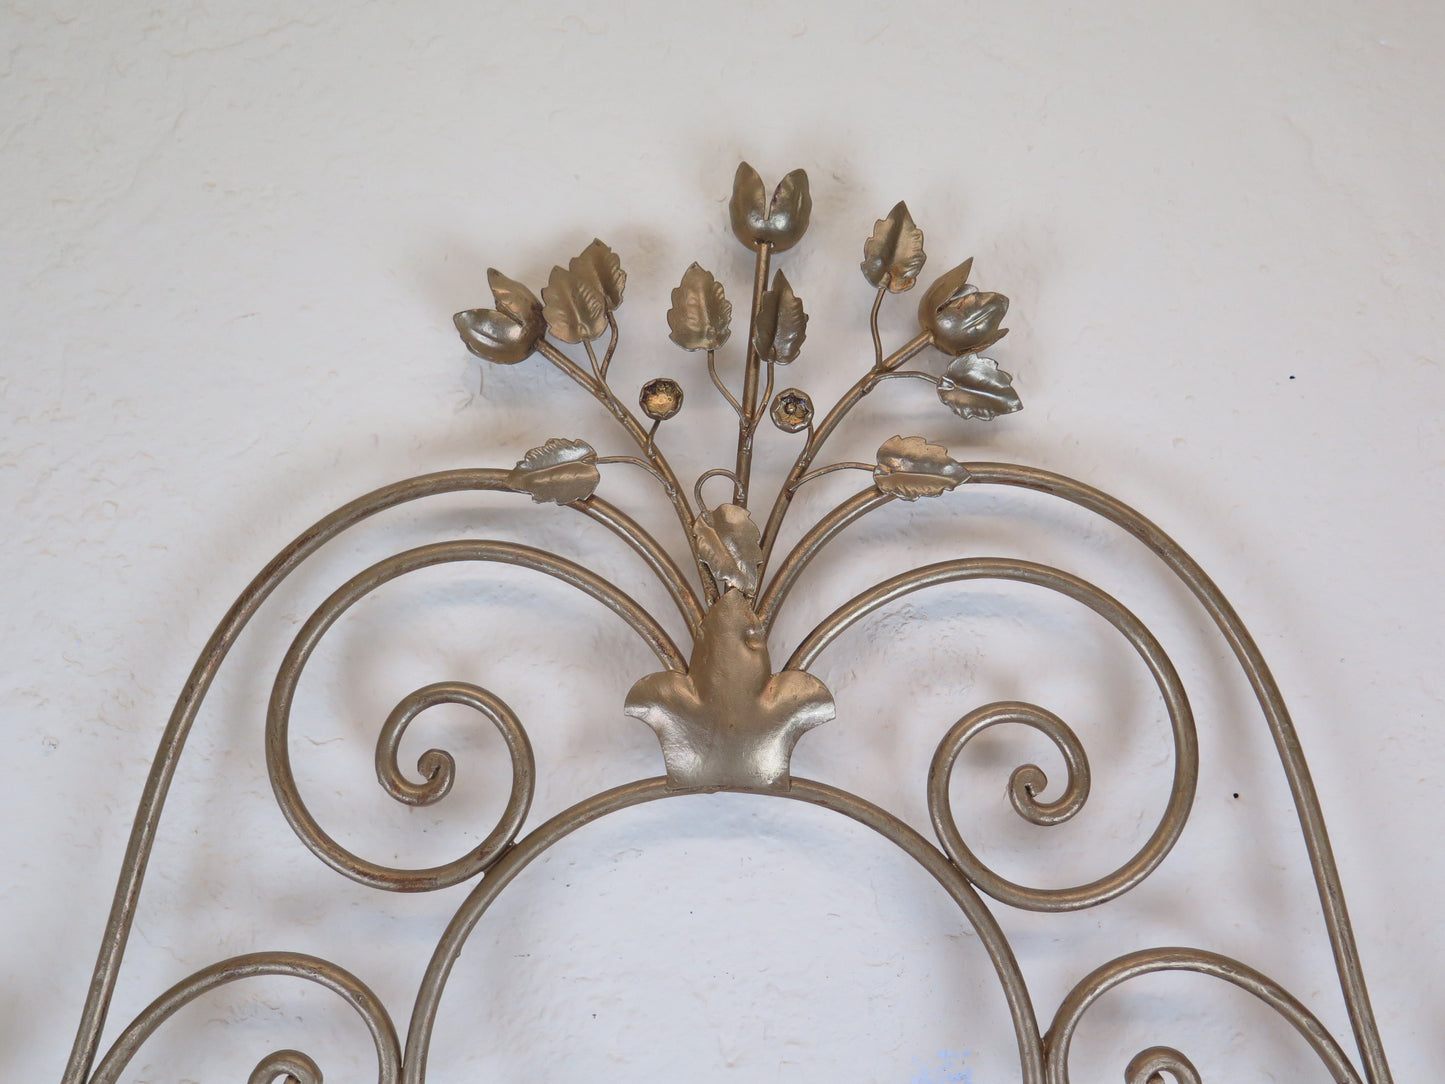 TWO WROUGHT IRON HEADBOARDS GOLDEN SINGLE OR DOUBLE HEADBOARDS